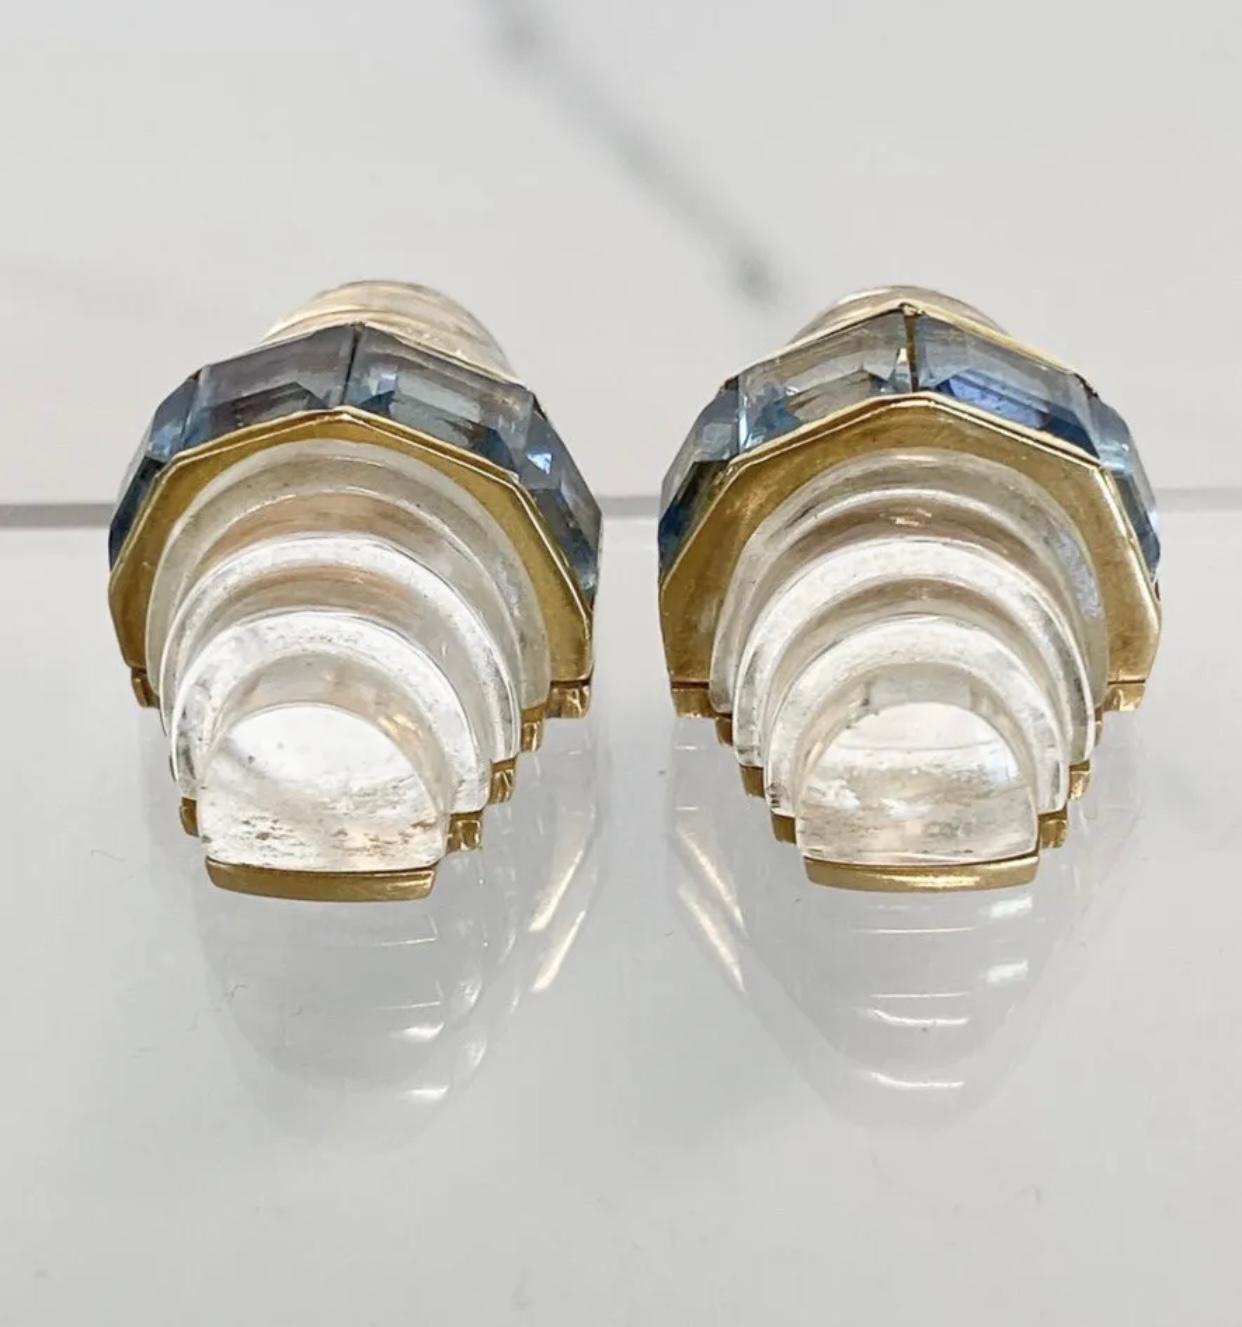 These 14k yellow gold Patricia Schepps Vail for Seamen earrings with topaz and clear crystal quartz are a rare find! They are clip on style.



Authenticity Guarantee: All of our items are guaranteed to be authentic designer items. If found to be